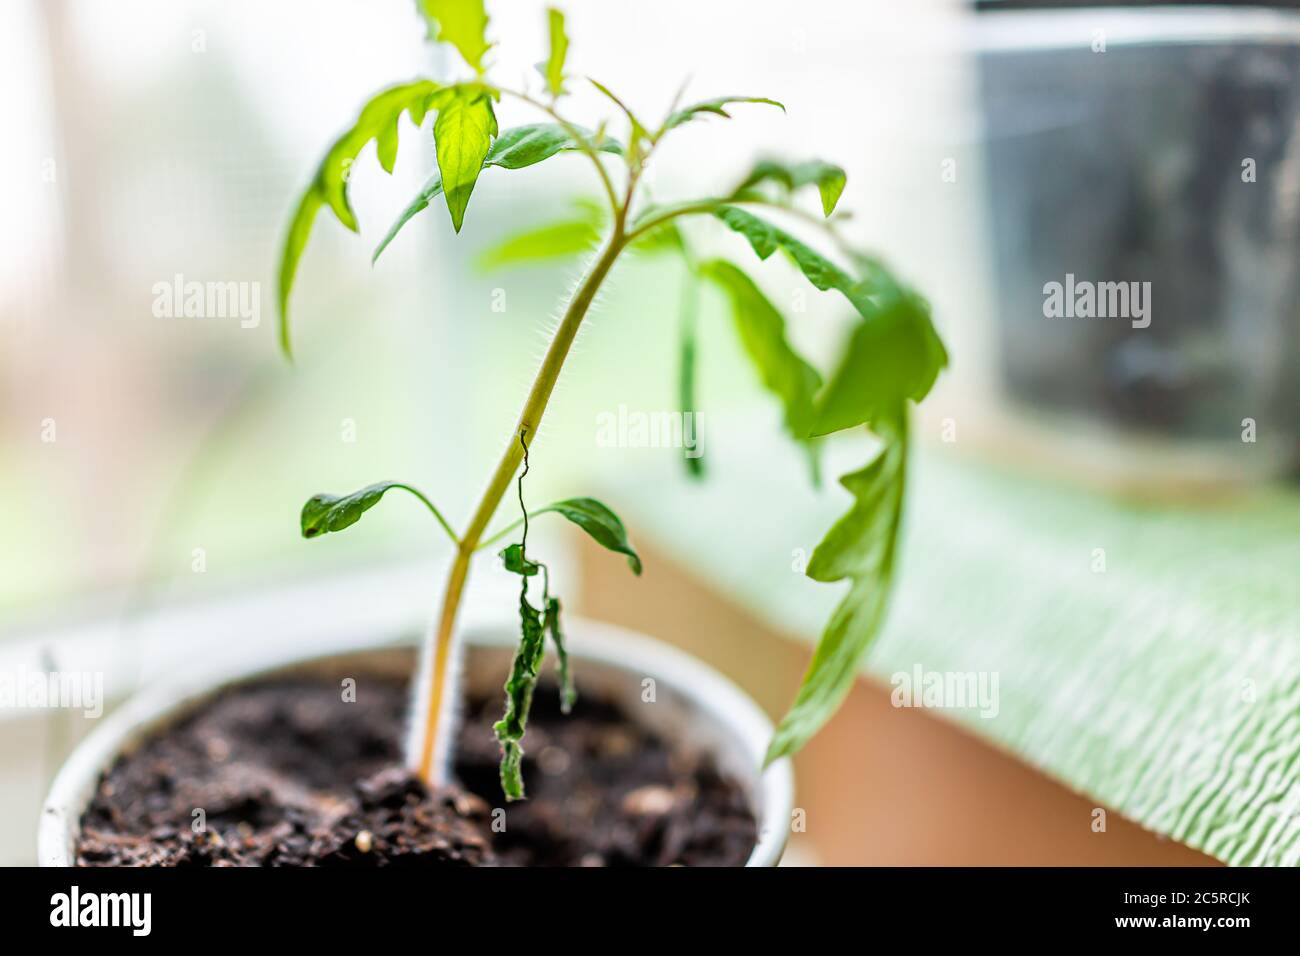 Closeup of green small wispy leaves tomato plant seedling in container growing indoors in soil in spring with texture and disease wilted branch Stock Photo